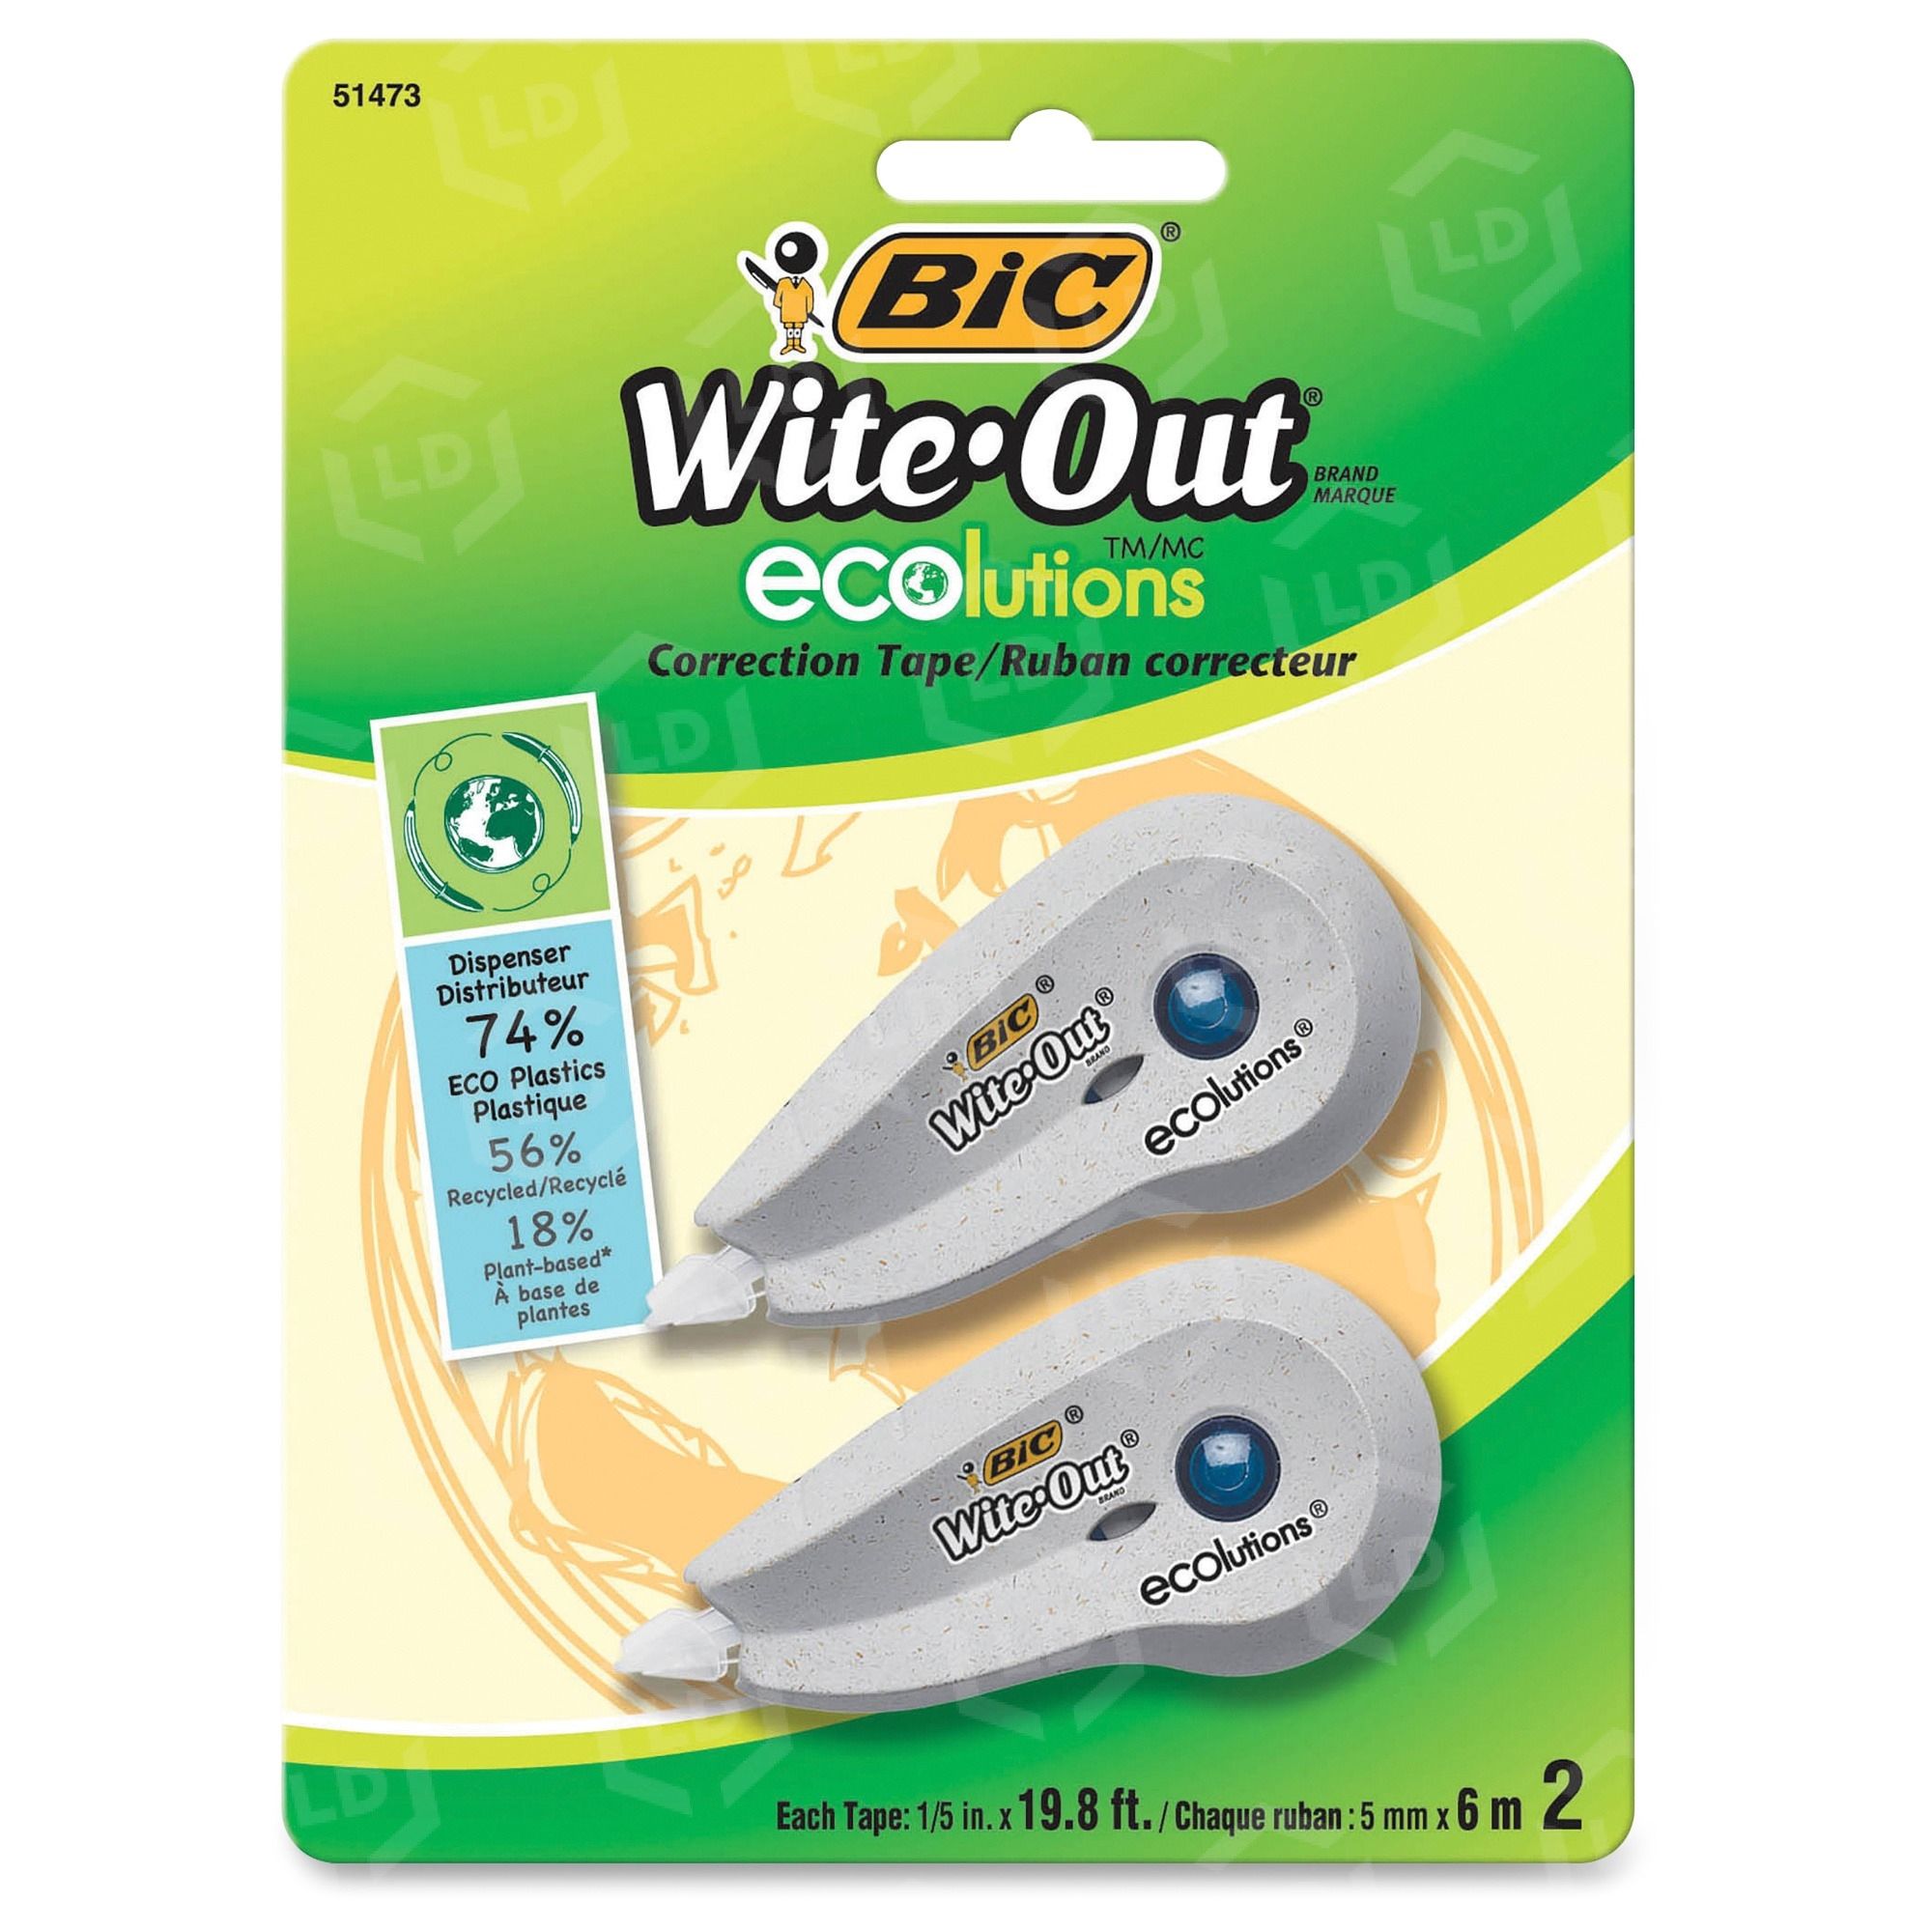 Paper Mate Liquid Paper Dryline Grip White Out Correction Tape 2